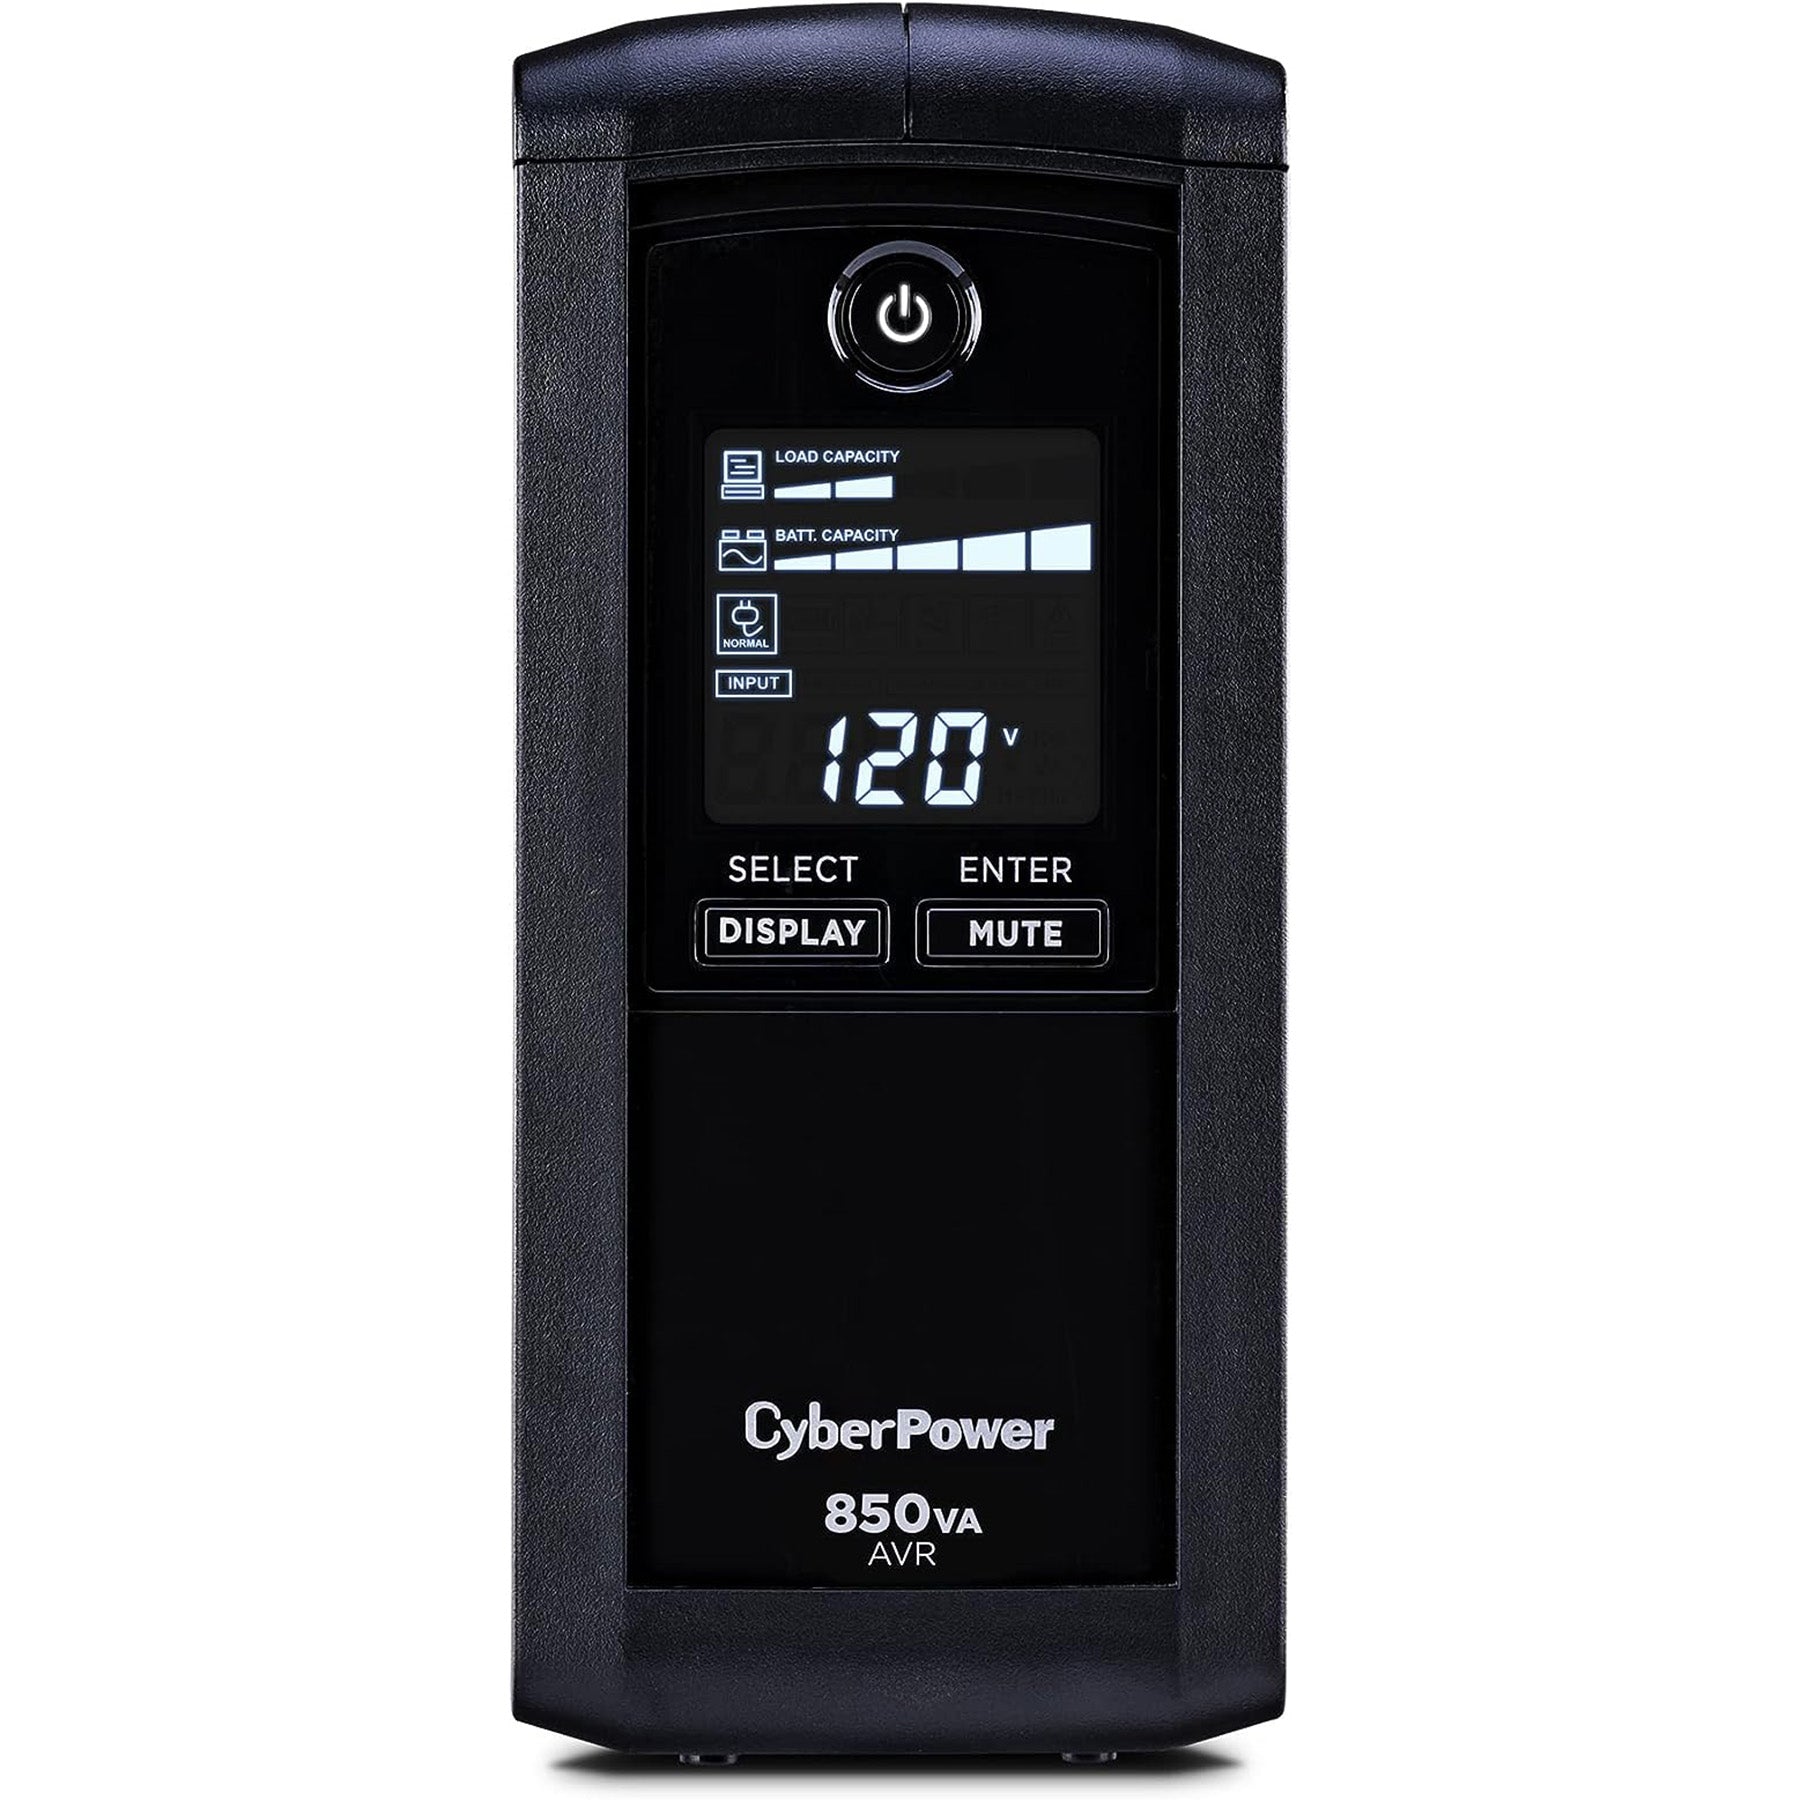 Cyberpower 850VA Pure Sine Wave Battery Backup Part Number: PSU-DVRUPS850